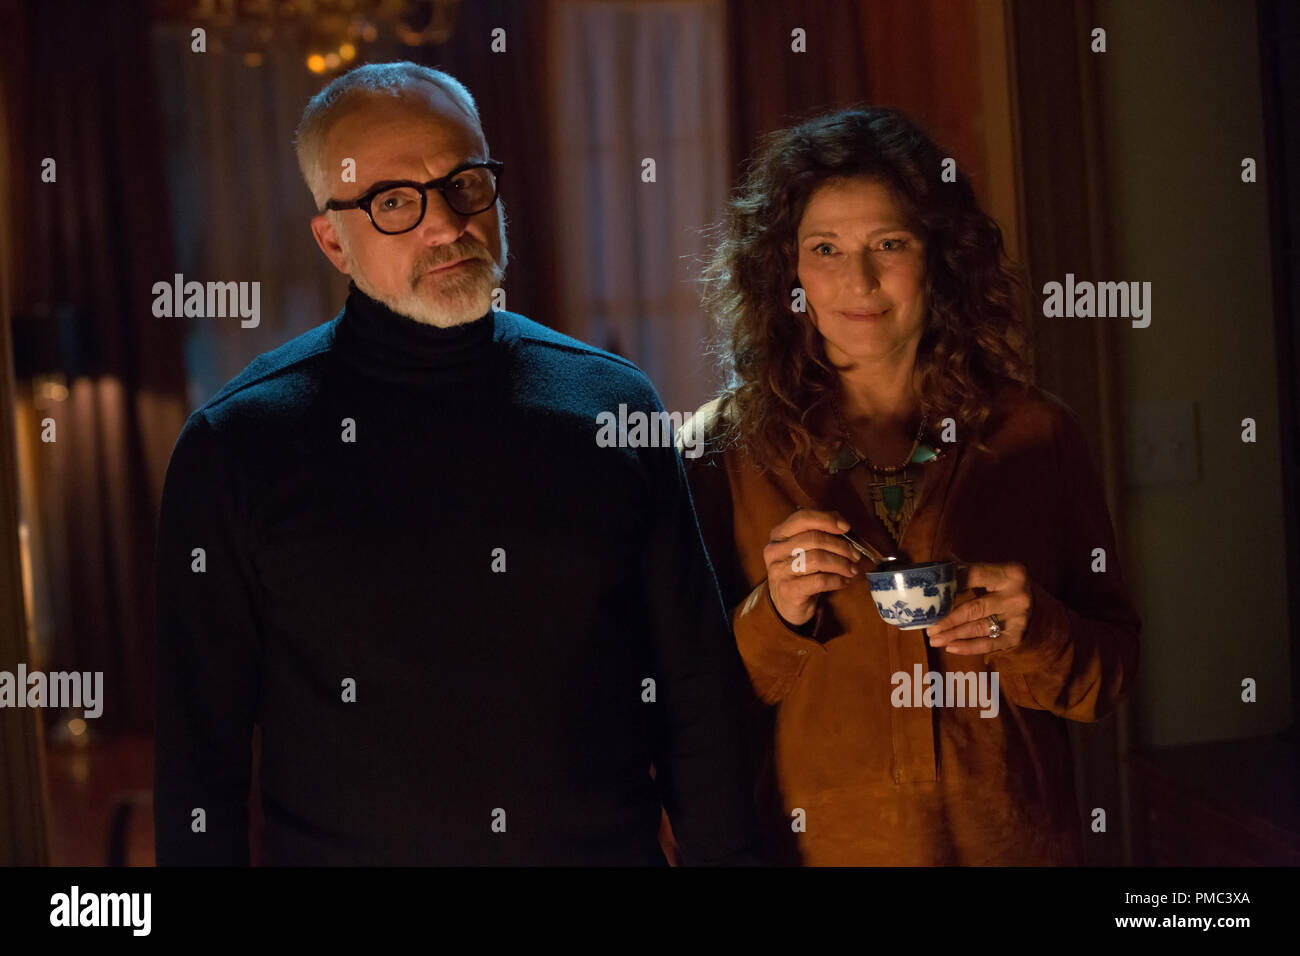 Drs. Dean (BRADLEY WHITFORD) and Missy Armitage (CATHERINE KEENER) in Universal Pictures’ “Get Out,” a speculative thriller from Blumhouse.  When a young African-American man visits his white girlfriend’s family estate, he becomes ensnared in a more sinister real reason for the invitation. (2017) Stock Photo